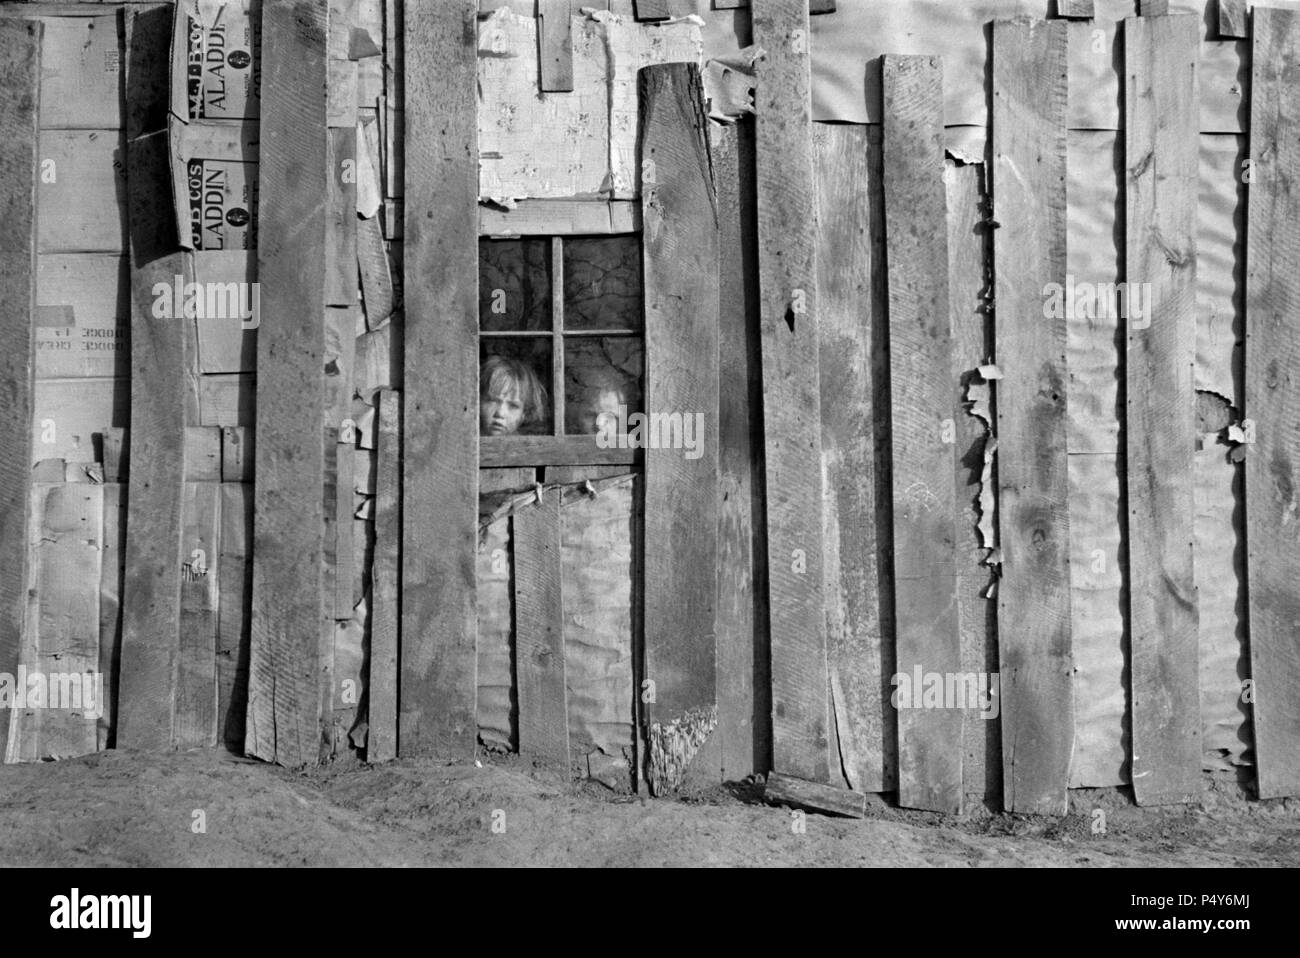 Detail Side of House, Two Children Looking out Window, Earl Pauley Farm, near Smithland, Iowa, USA, Russell Lee, U.S. Resettlement Administration, December 1936 Stock Photo